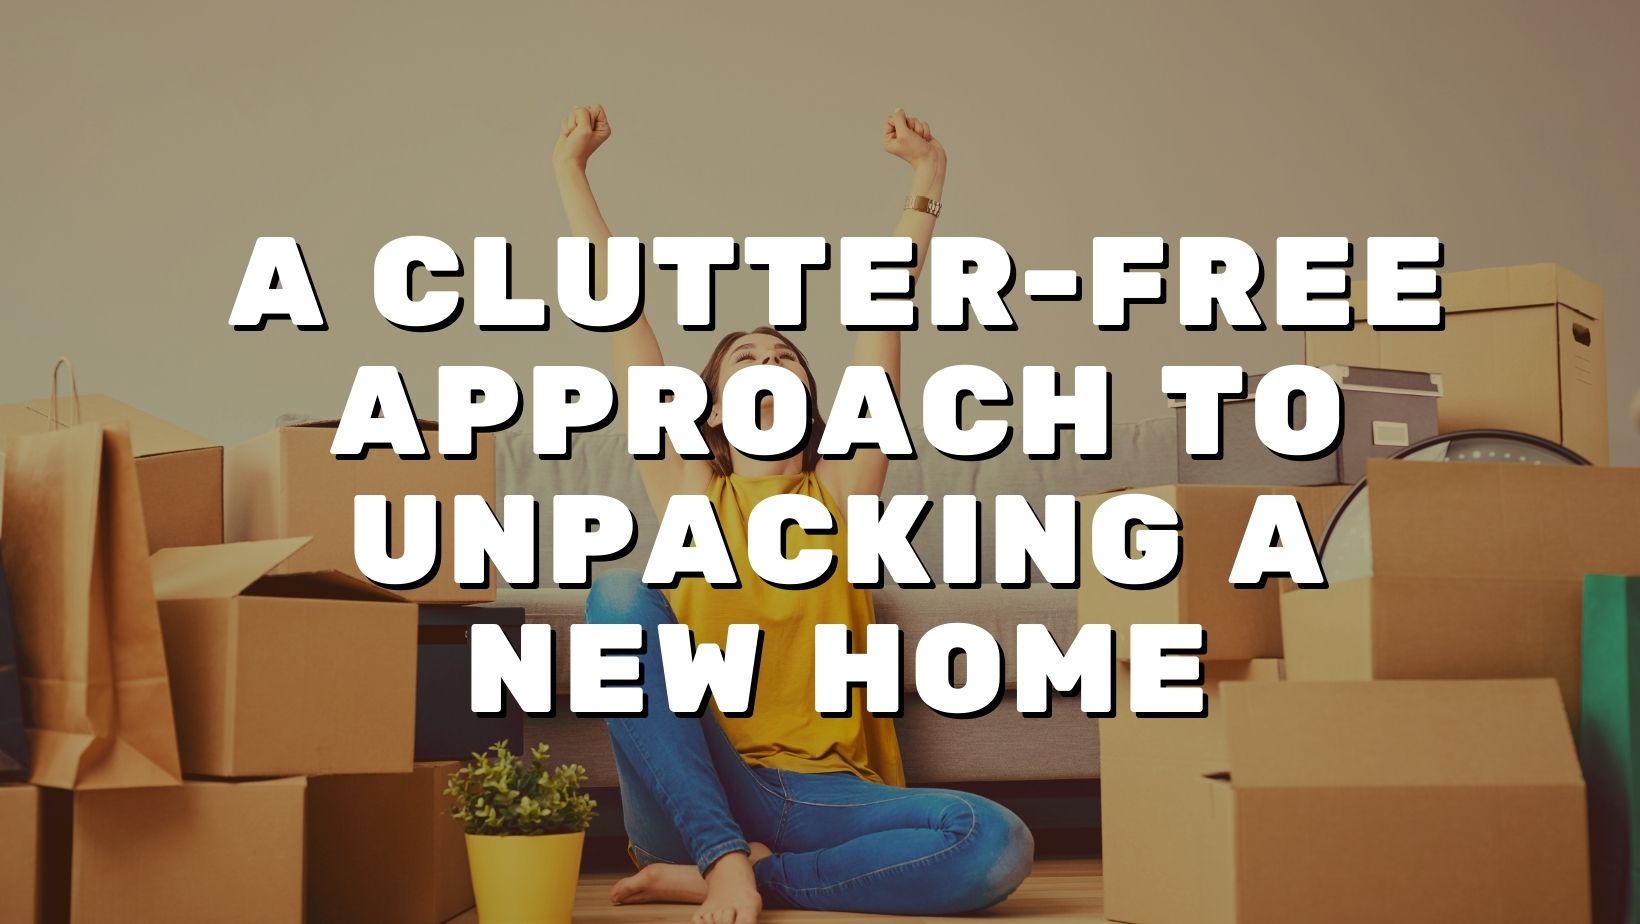 A Clutter-Free Approach to Unpacking a New Home